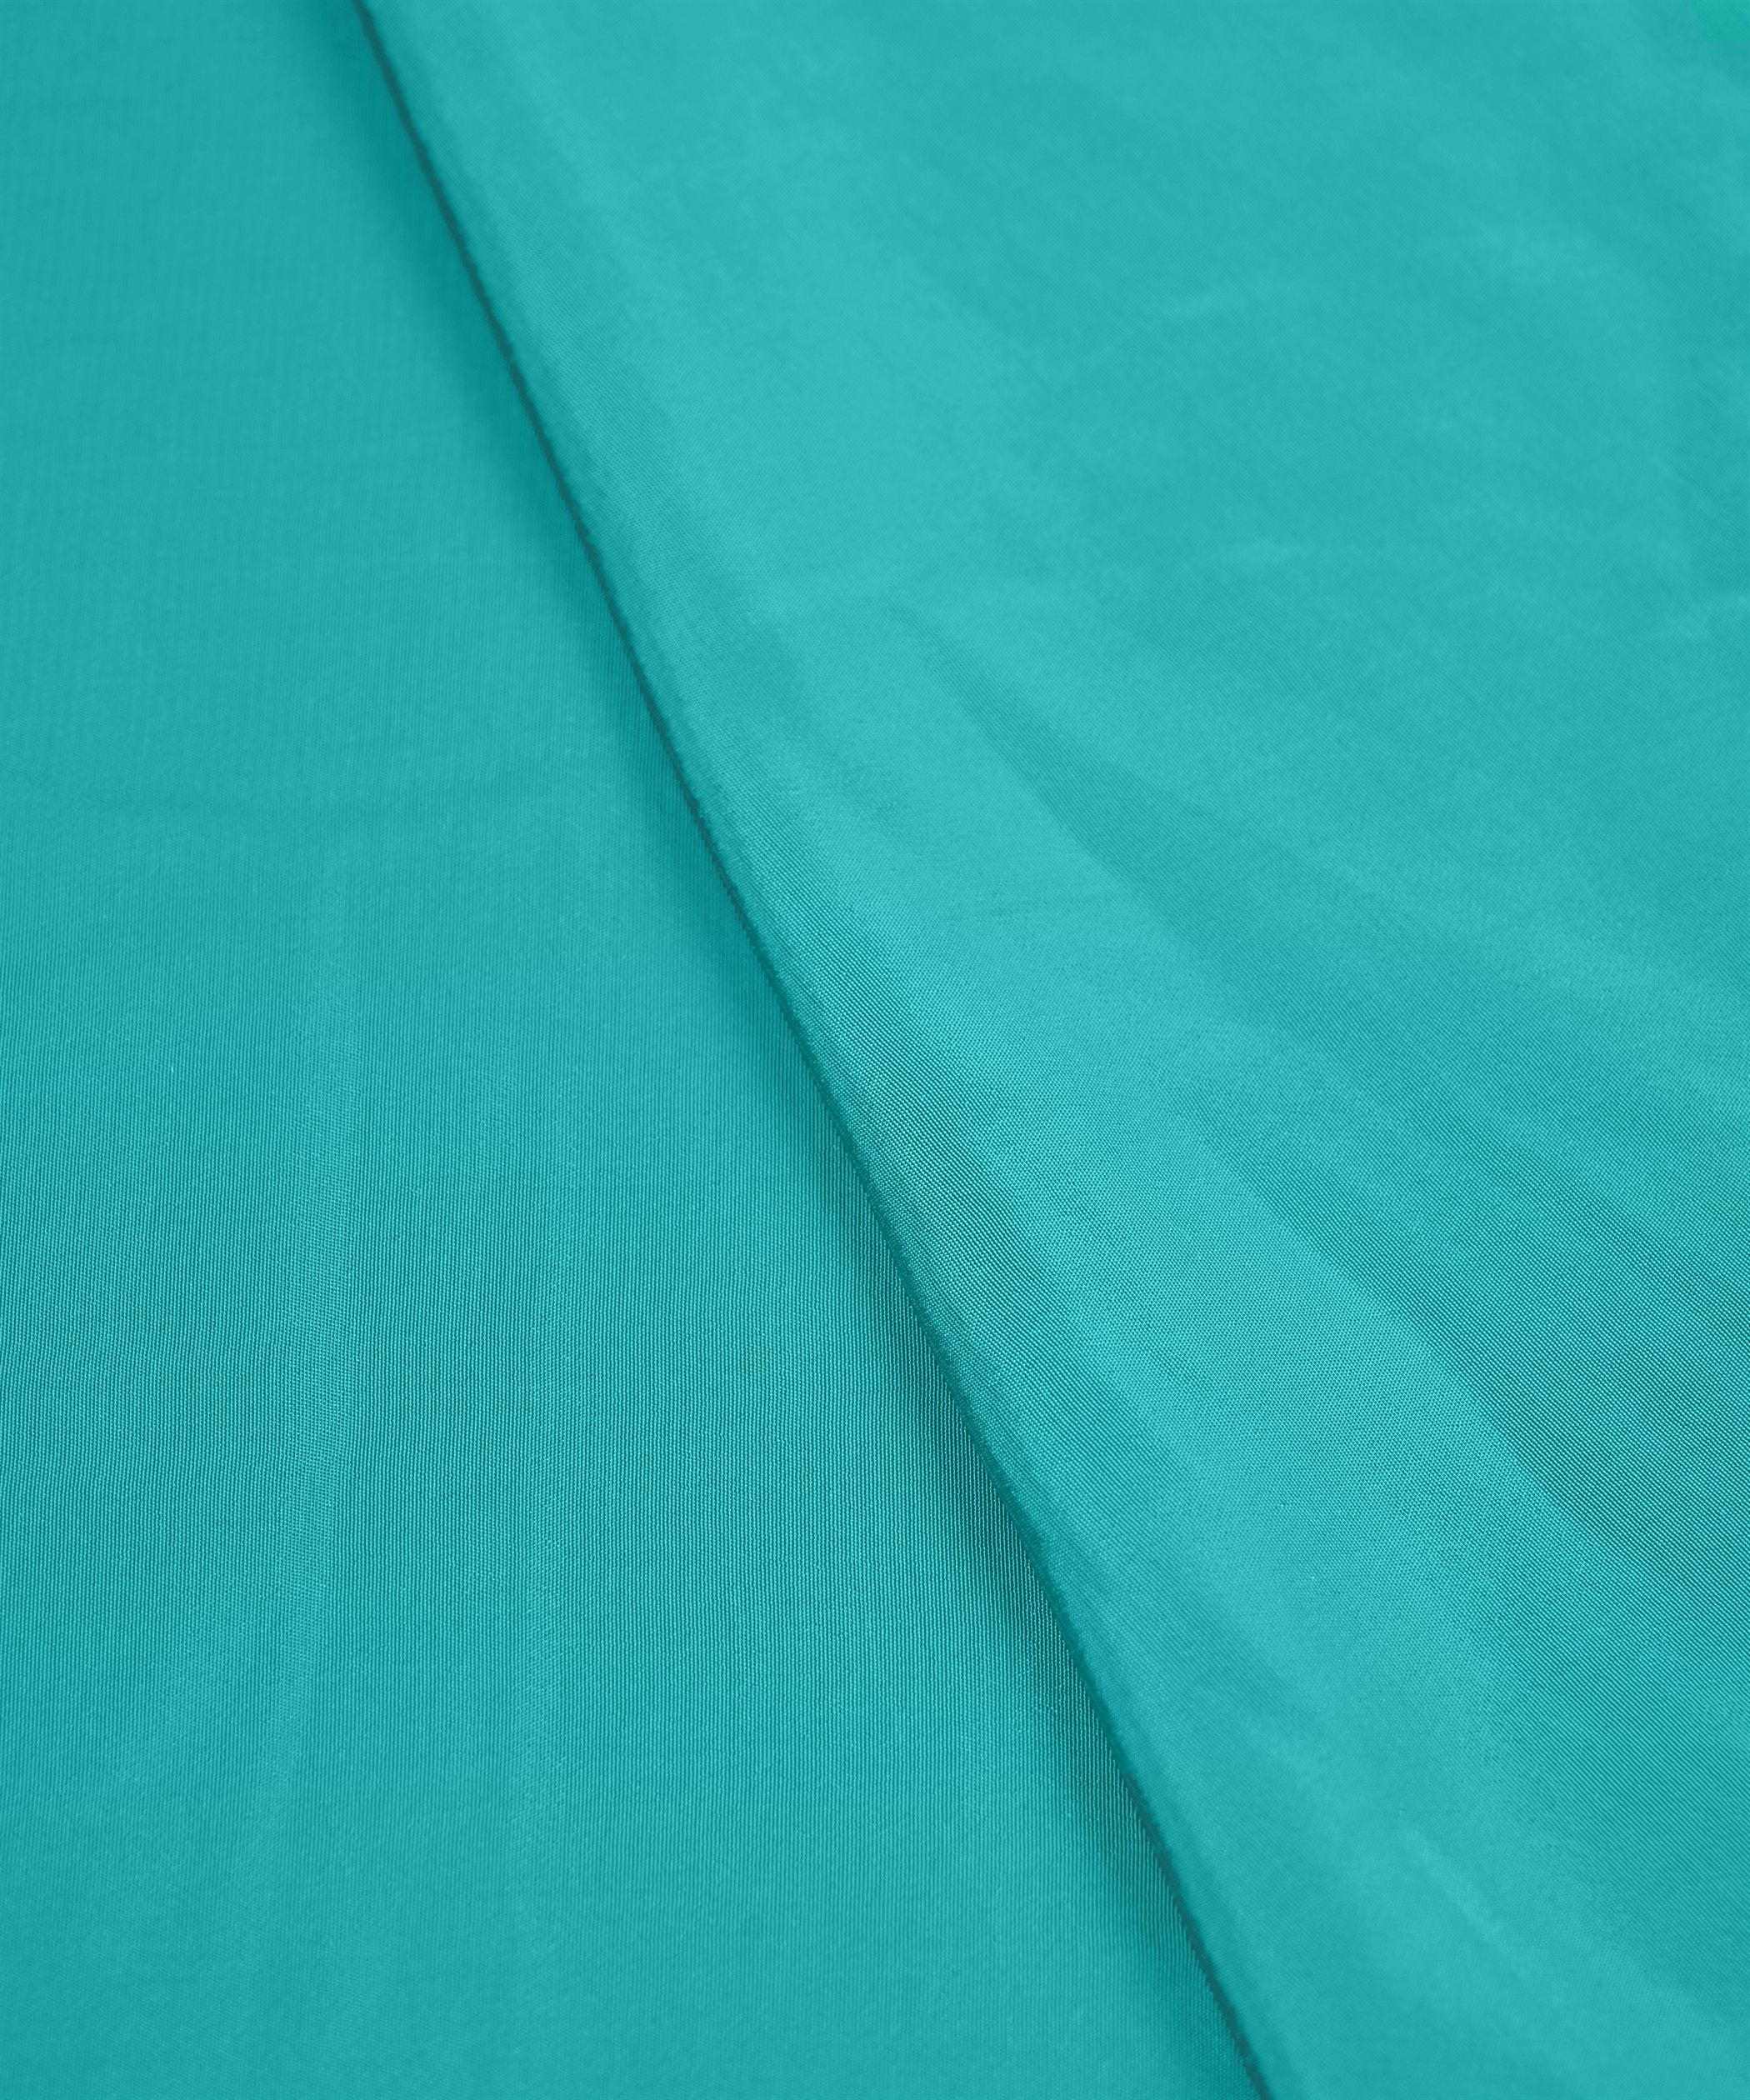 Sky Blue Plain Dyed American Crepe Fabric